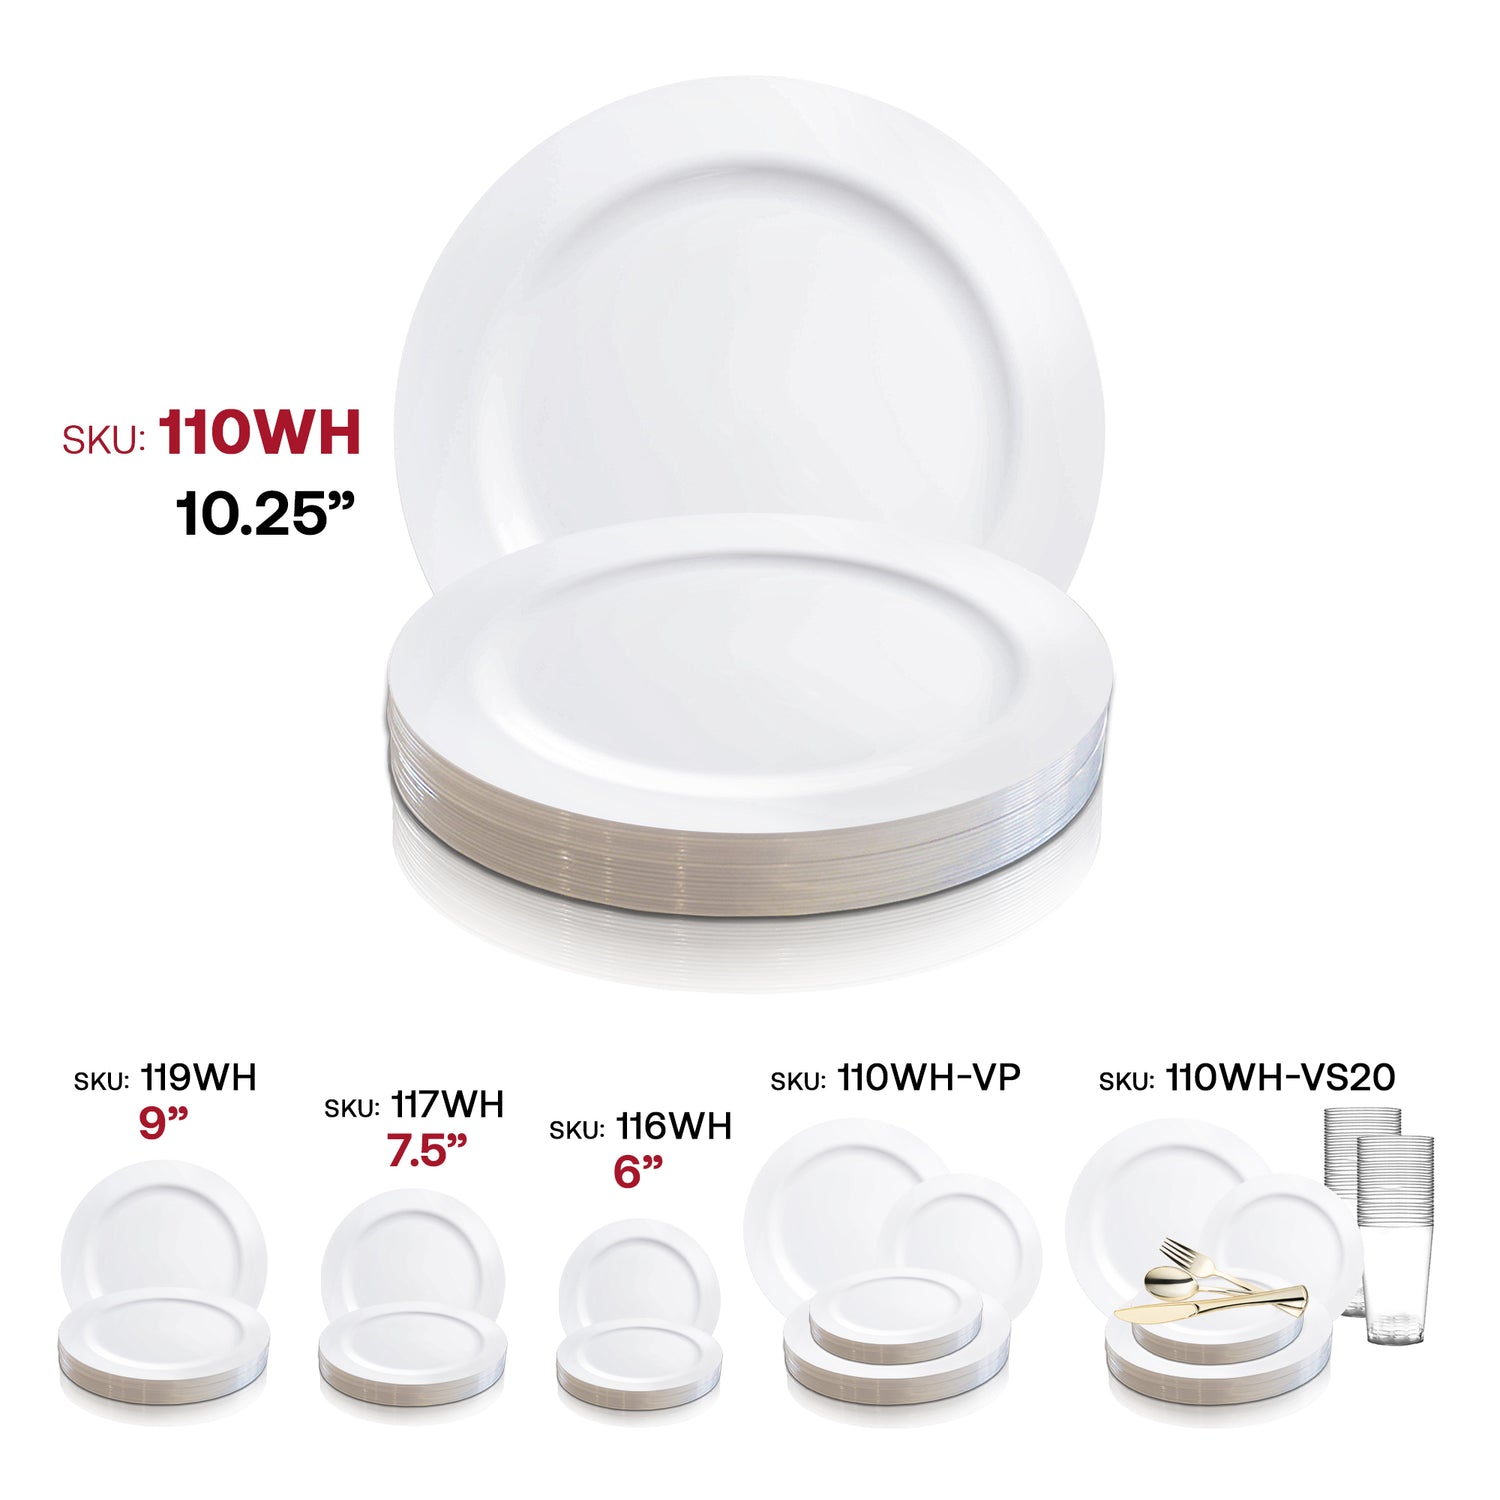 Solid White Economy Round Disposable Plastic Dinner Plates (10.25") SKU | The Kaya Collection